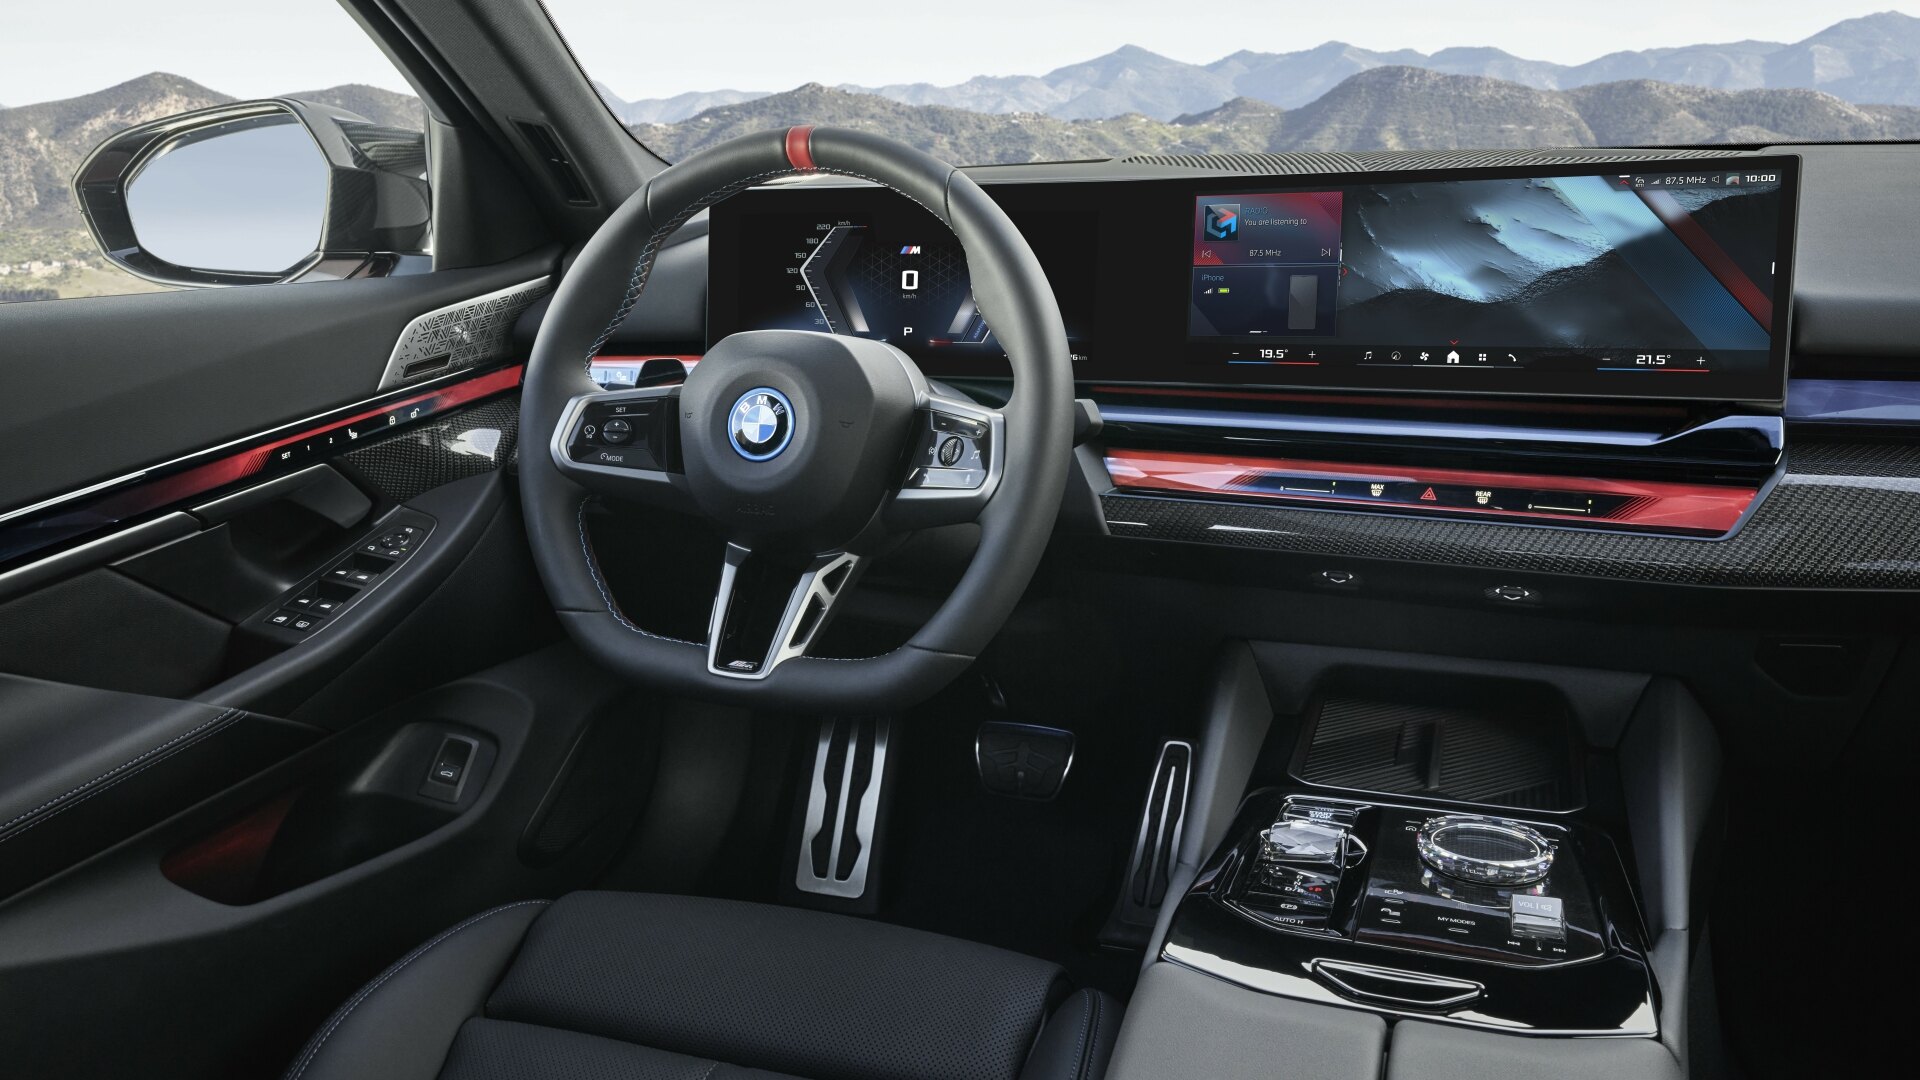 The Interior, Steering, Dashboard, And Central Console Of The New BMW i5 M60 xDrive